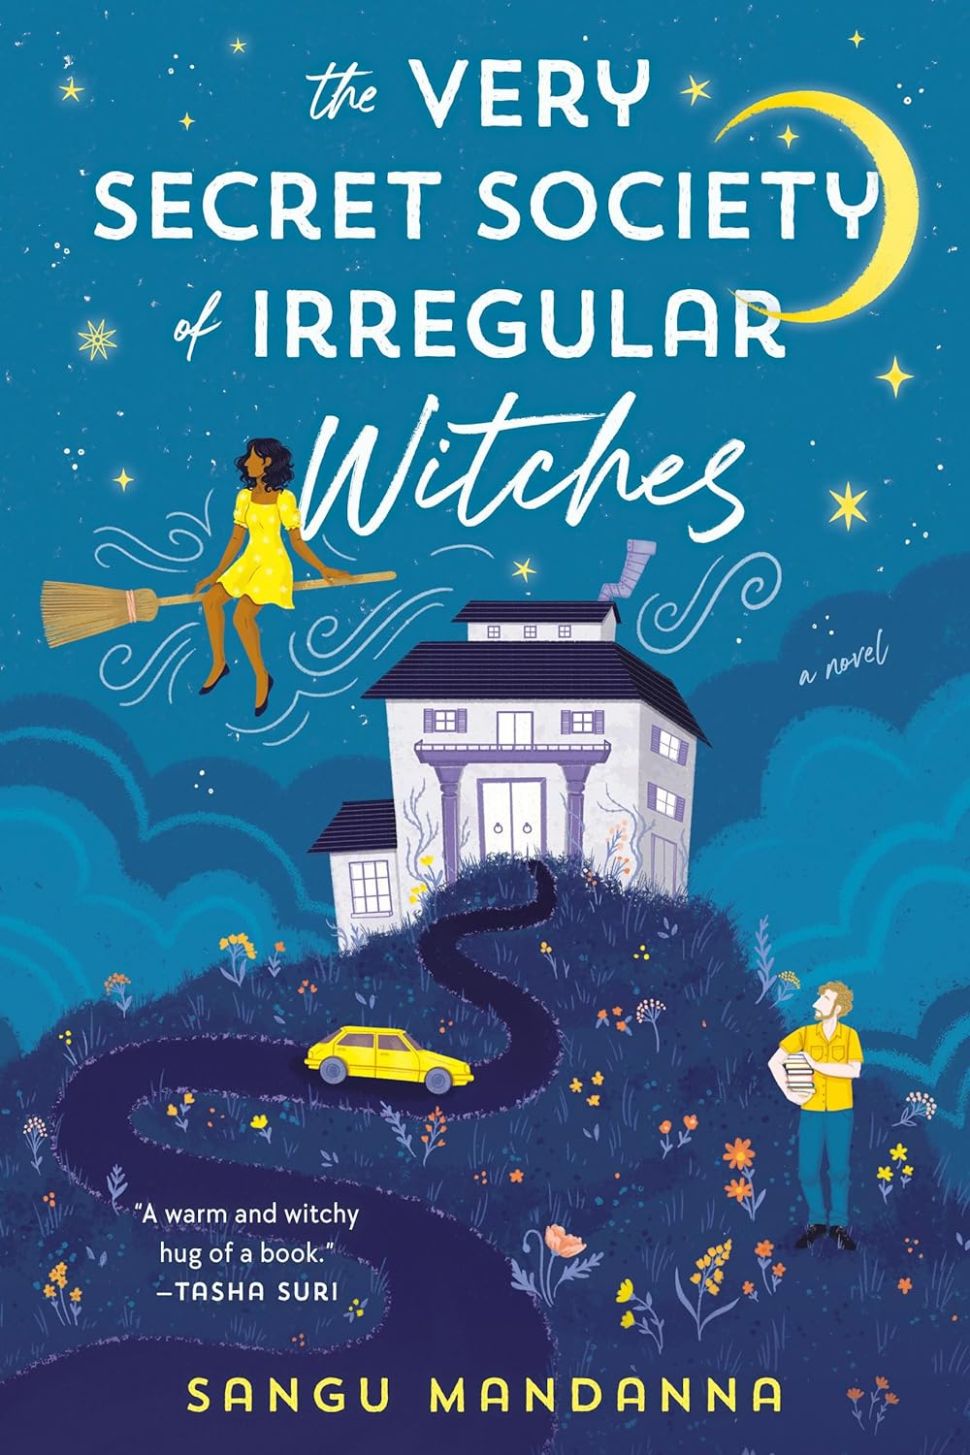 A book cover featuring a witch in a yellow dress riding a broomstick at night